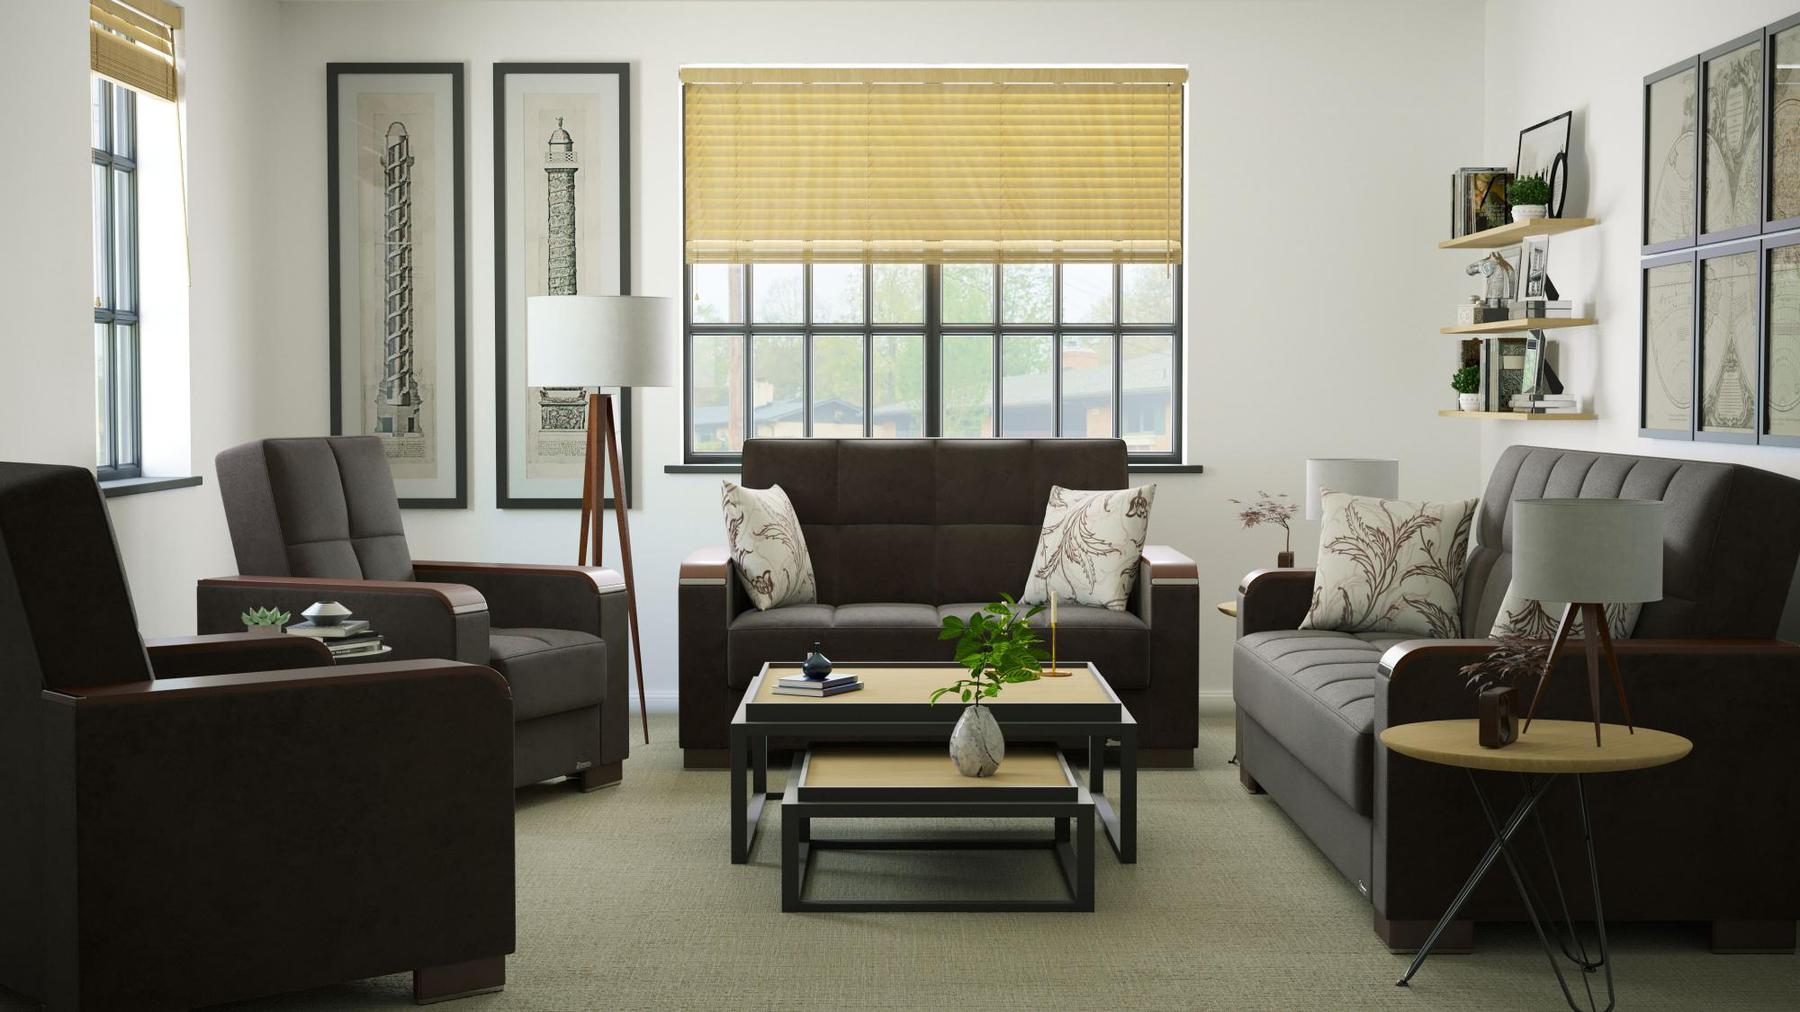 Modern design, Friar Brown , Microfiber upholstered convertible sleeper Loveseat with underseat storage from Voyage Luxe by Ottomanson in living room lifestyle setting with the matching furniture set. This Loveseat measures 67 inches width by 36 inches depth by 41 inches height.